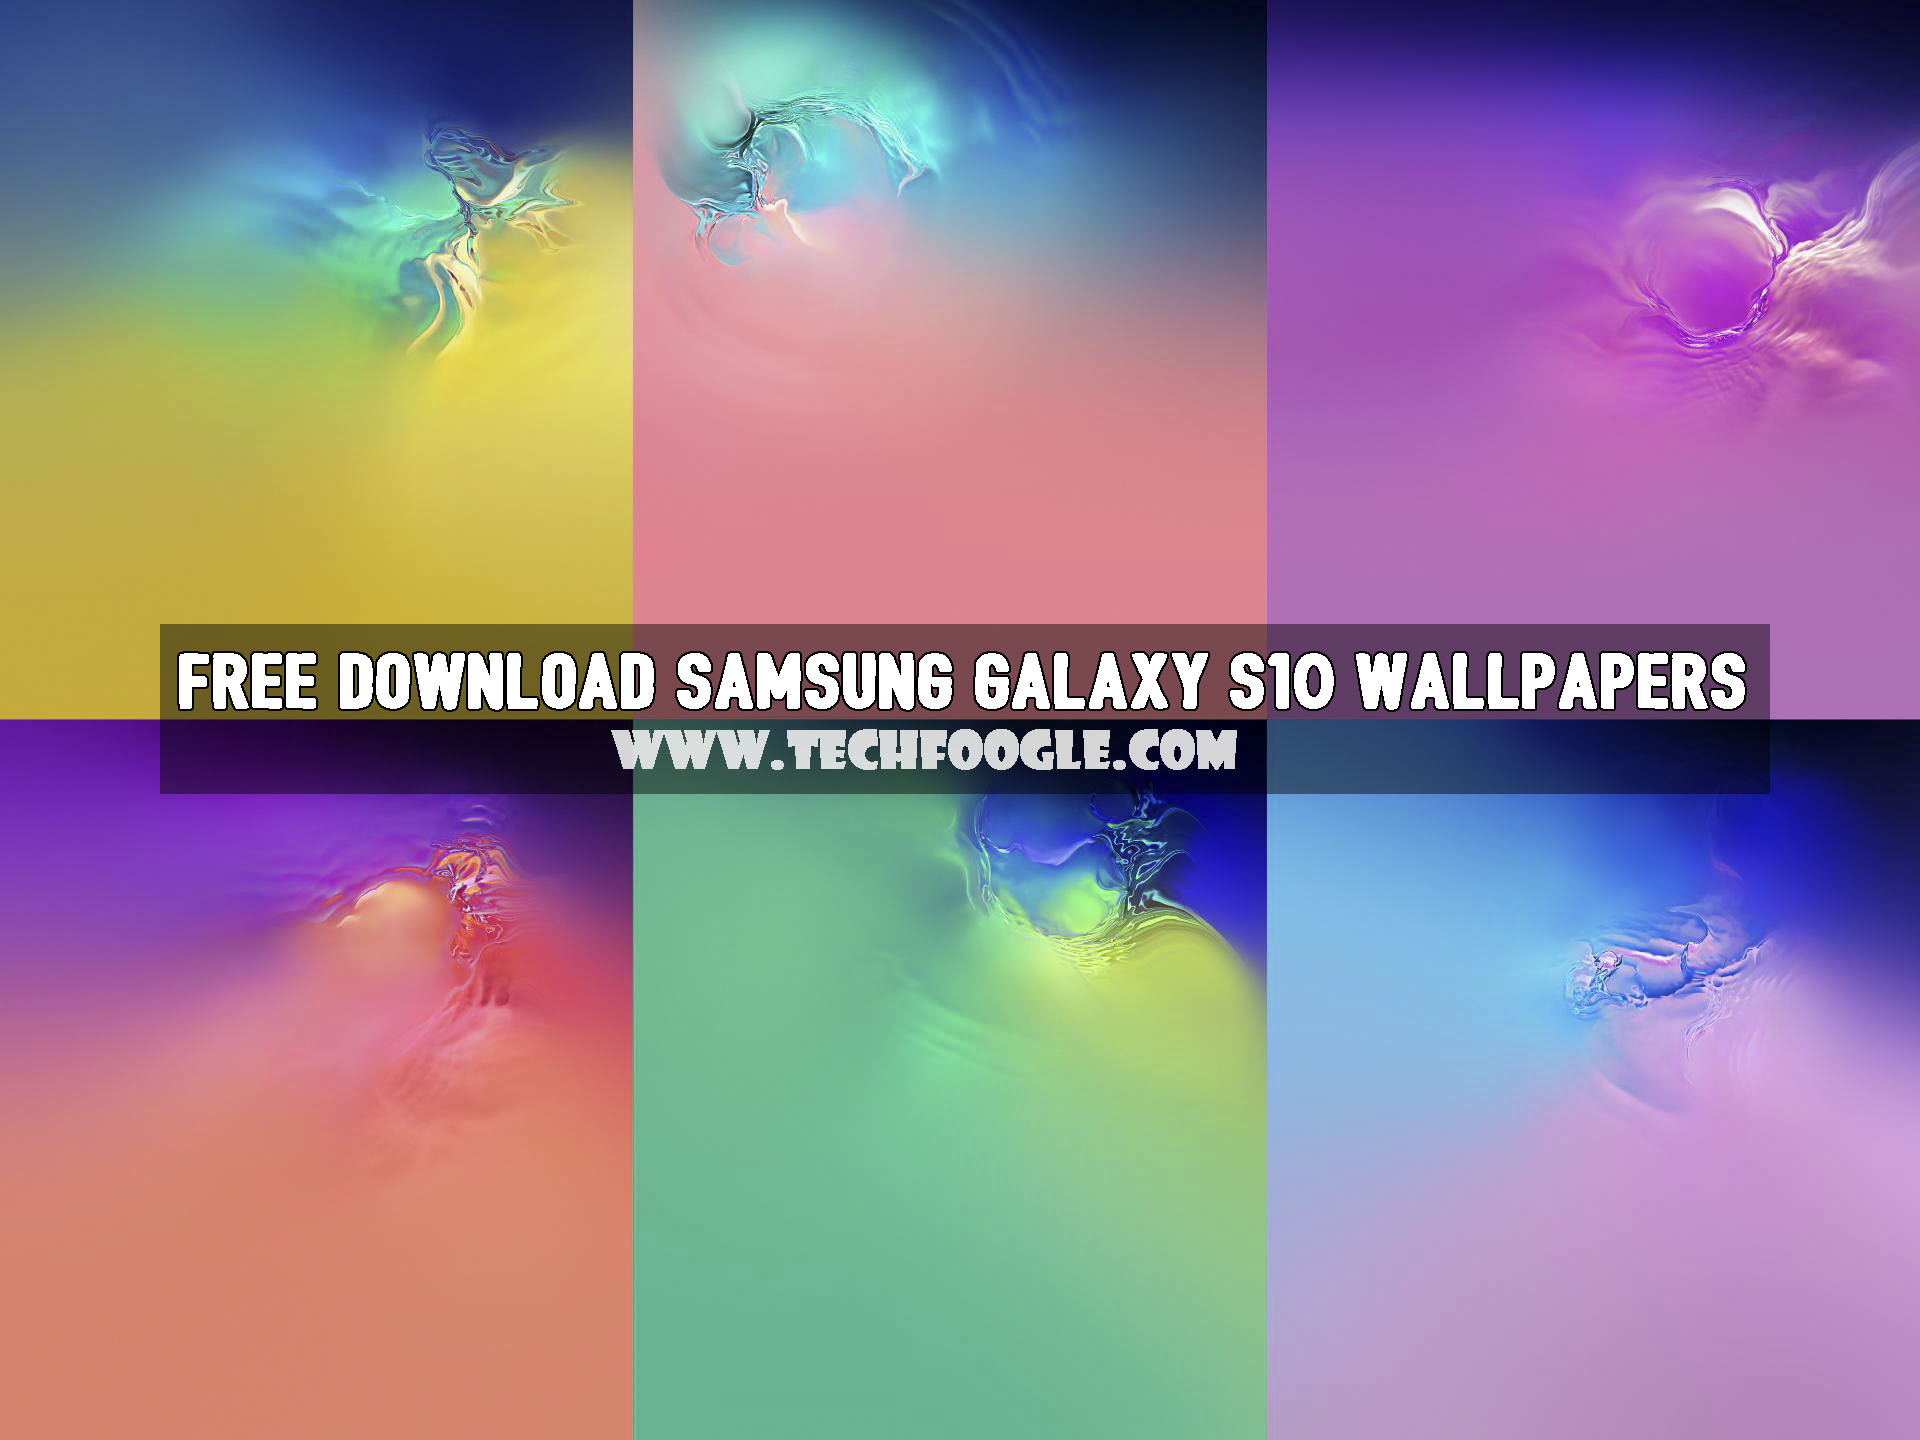 Download Samsung Galaxy S10 Wallpapers